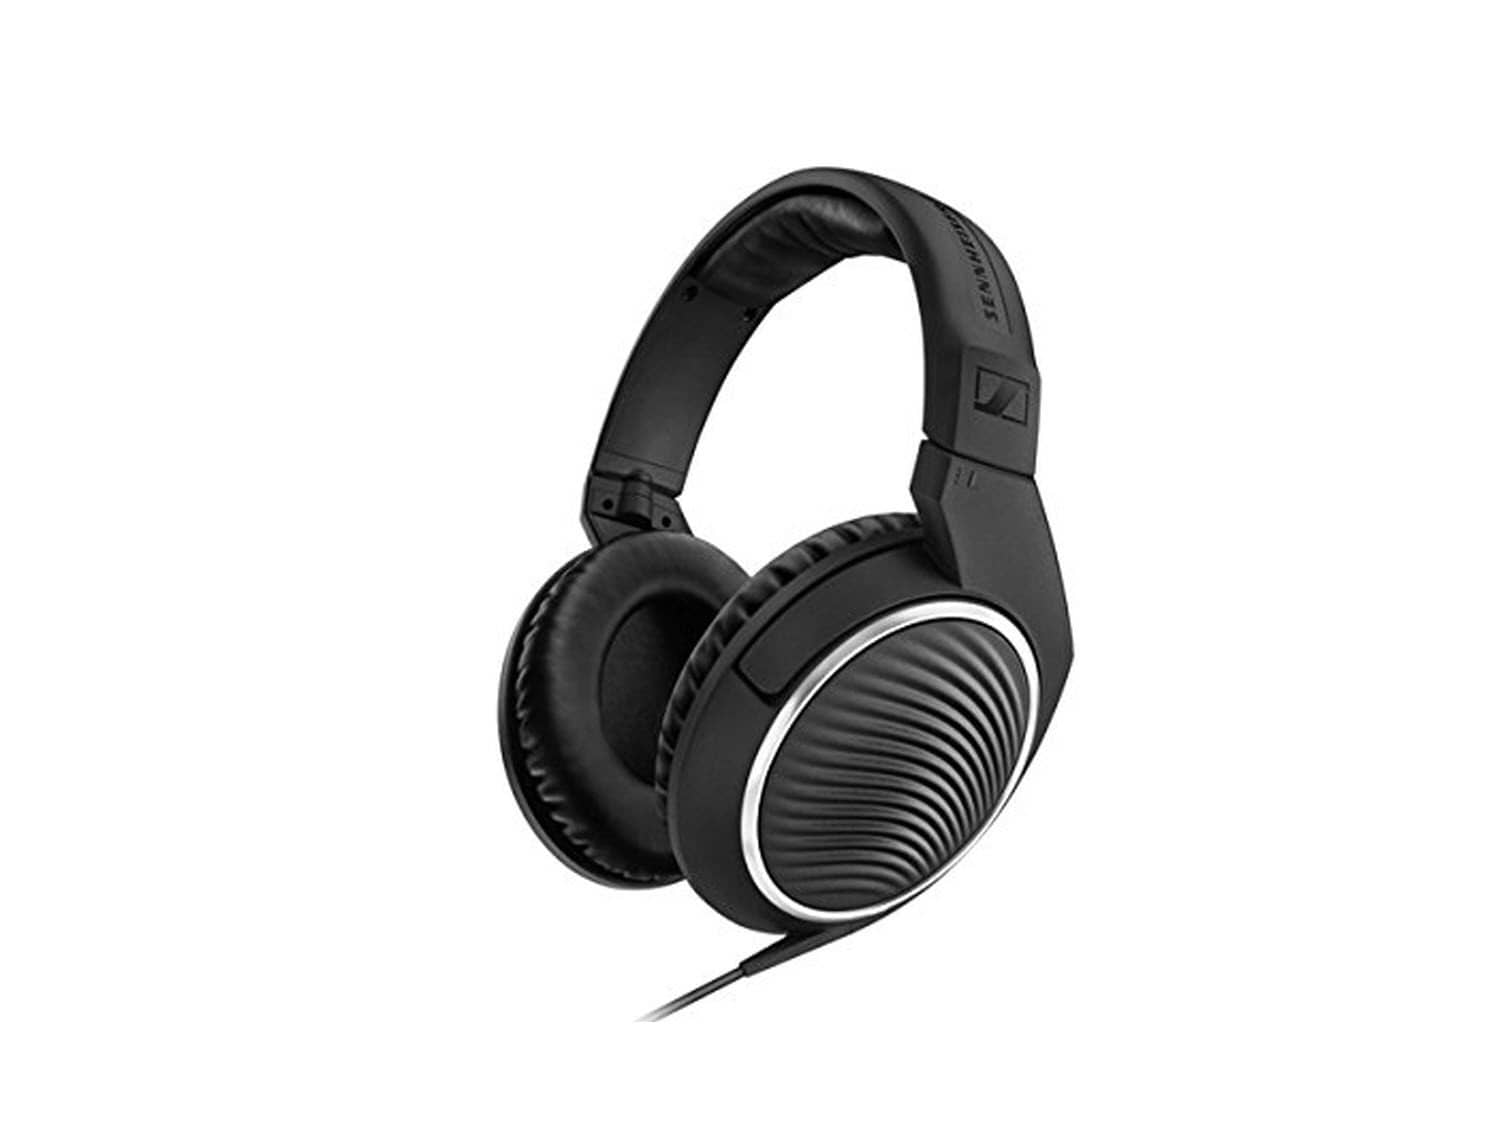 Sennheiser HD 461i Headset with Inline Mic and 3 Button Control